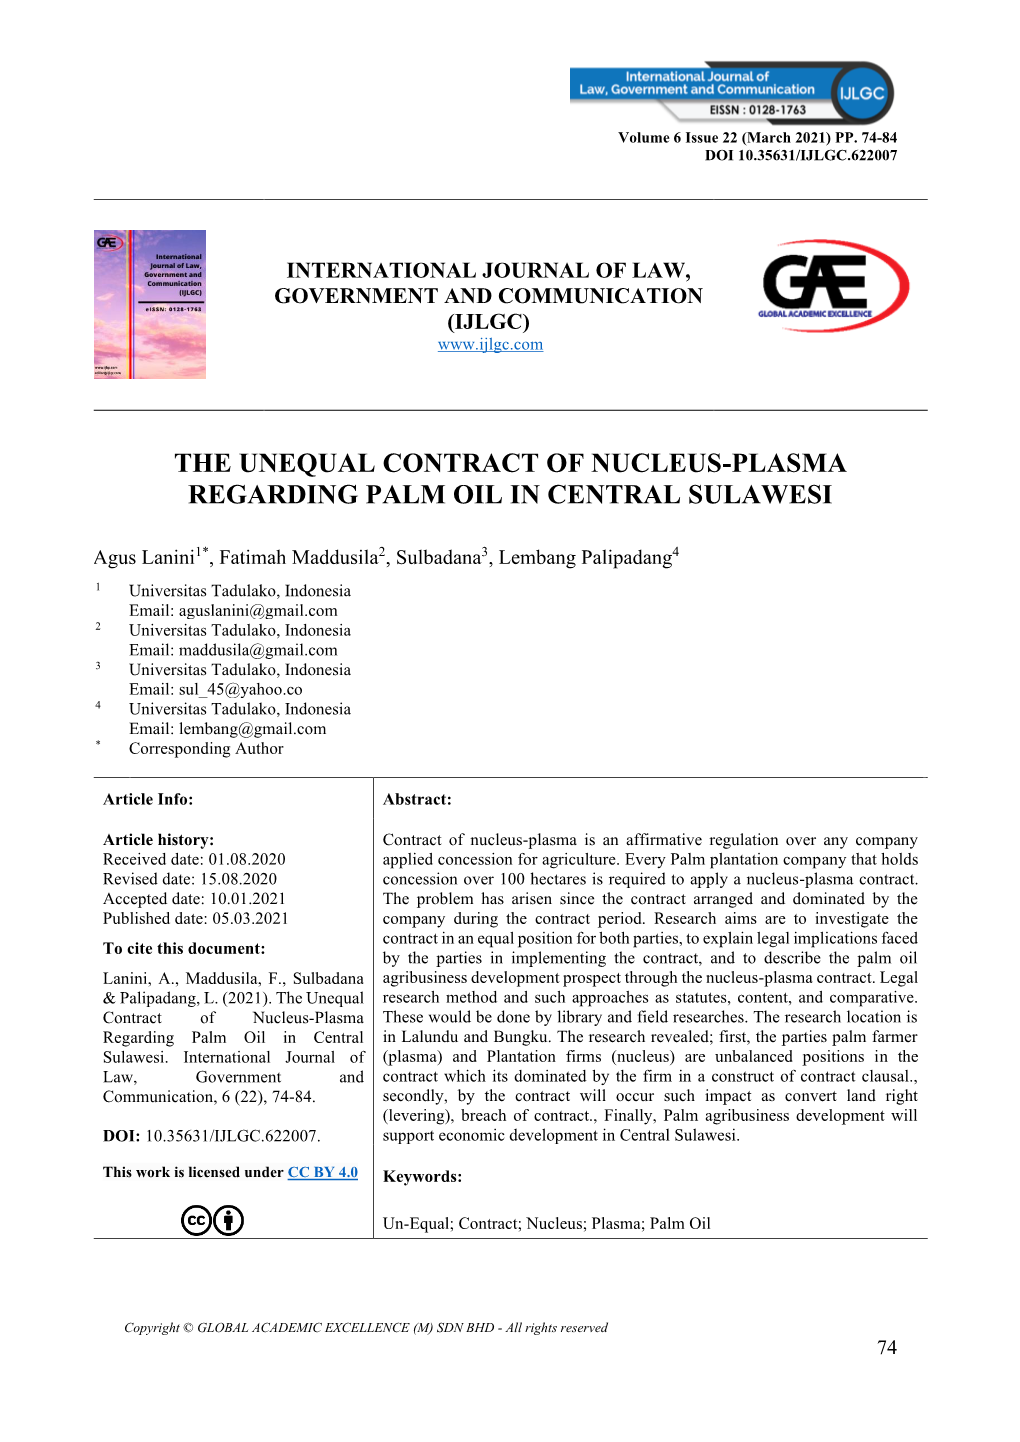 The Unequal Contract of Nucleus-Plasma Regarding Palm Oil in Central Sulawesi